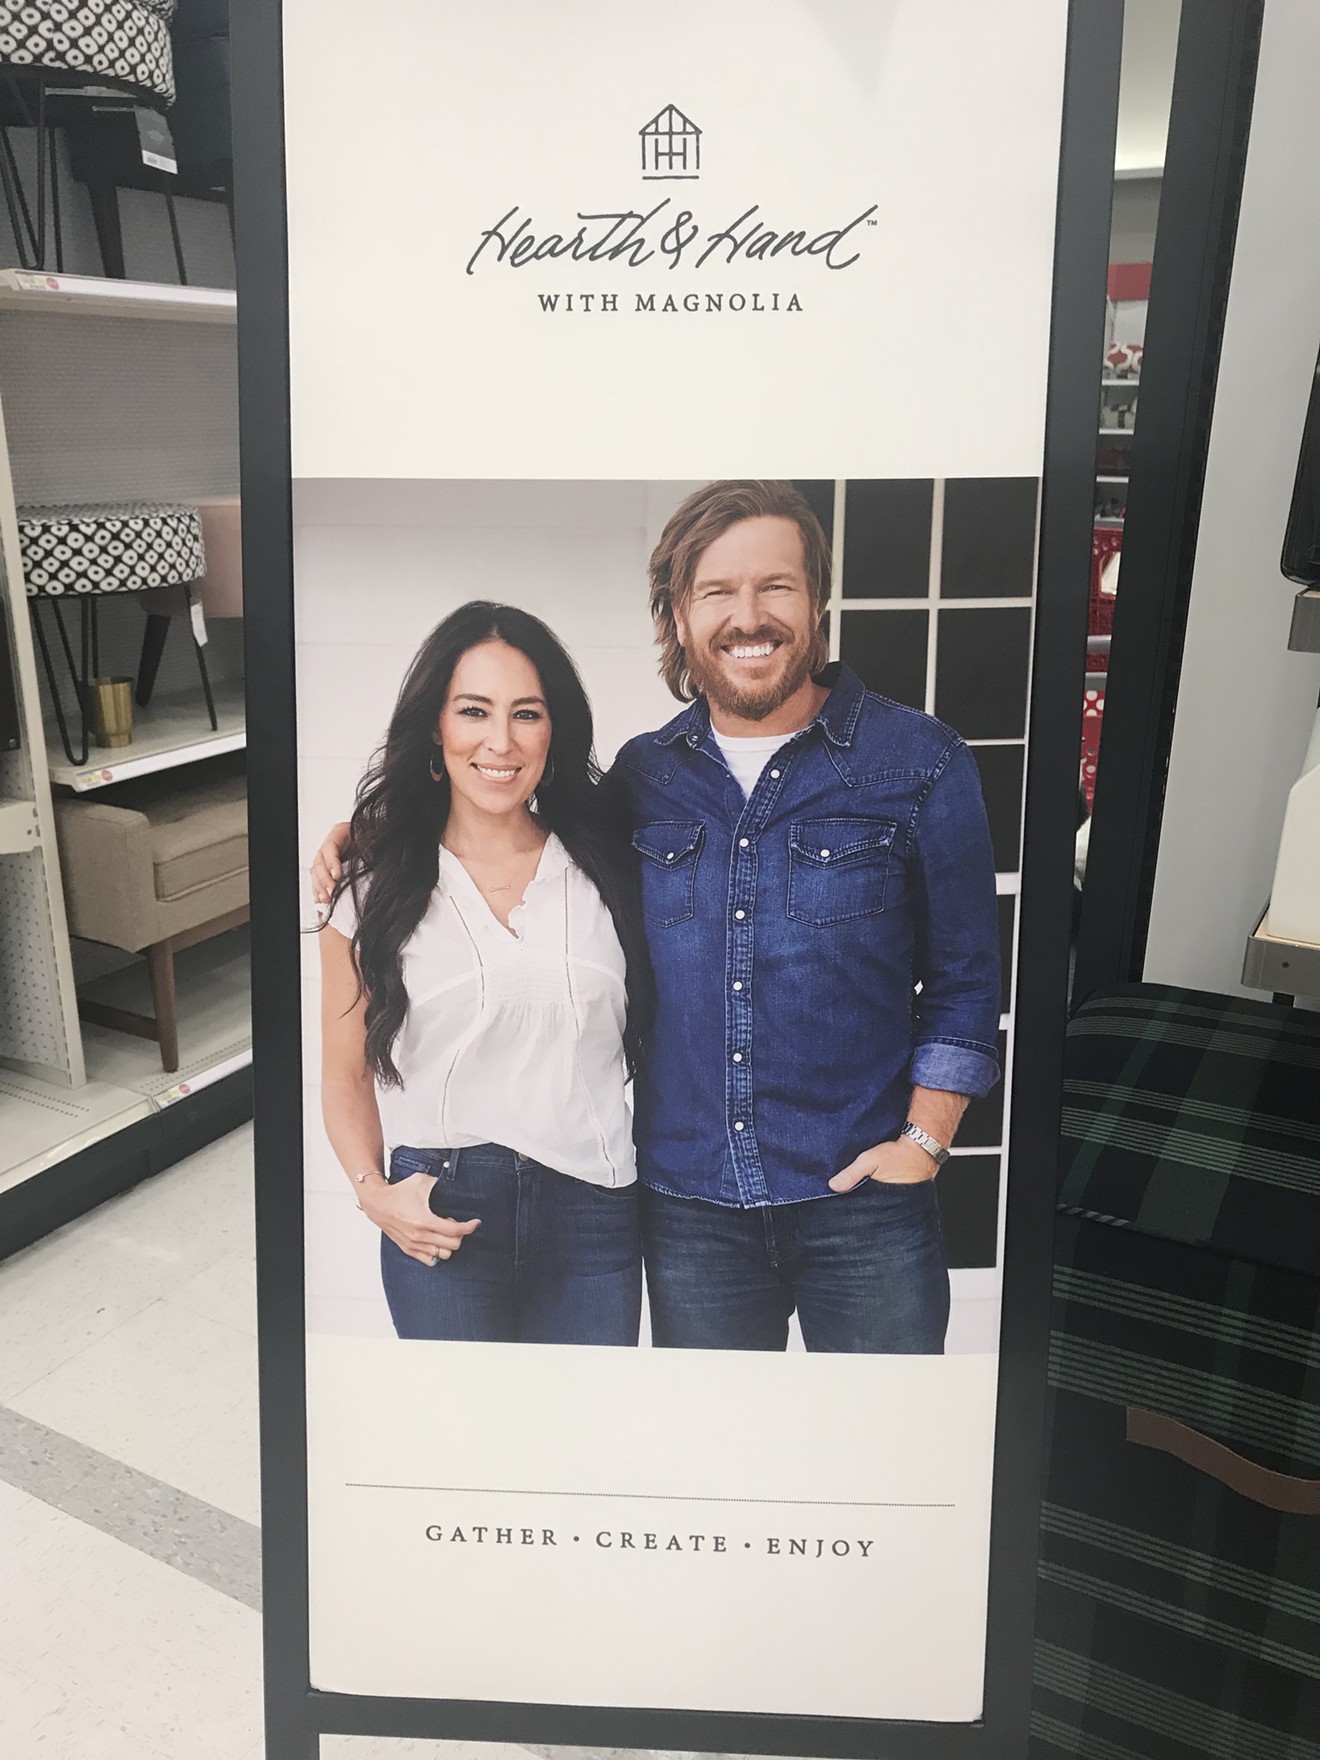 Chip and Joanna Gaines recently quit their show, Fixer Upper, but they're still expanding their brand.